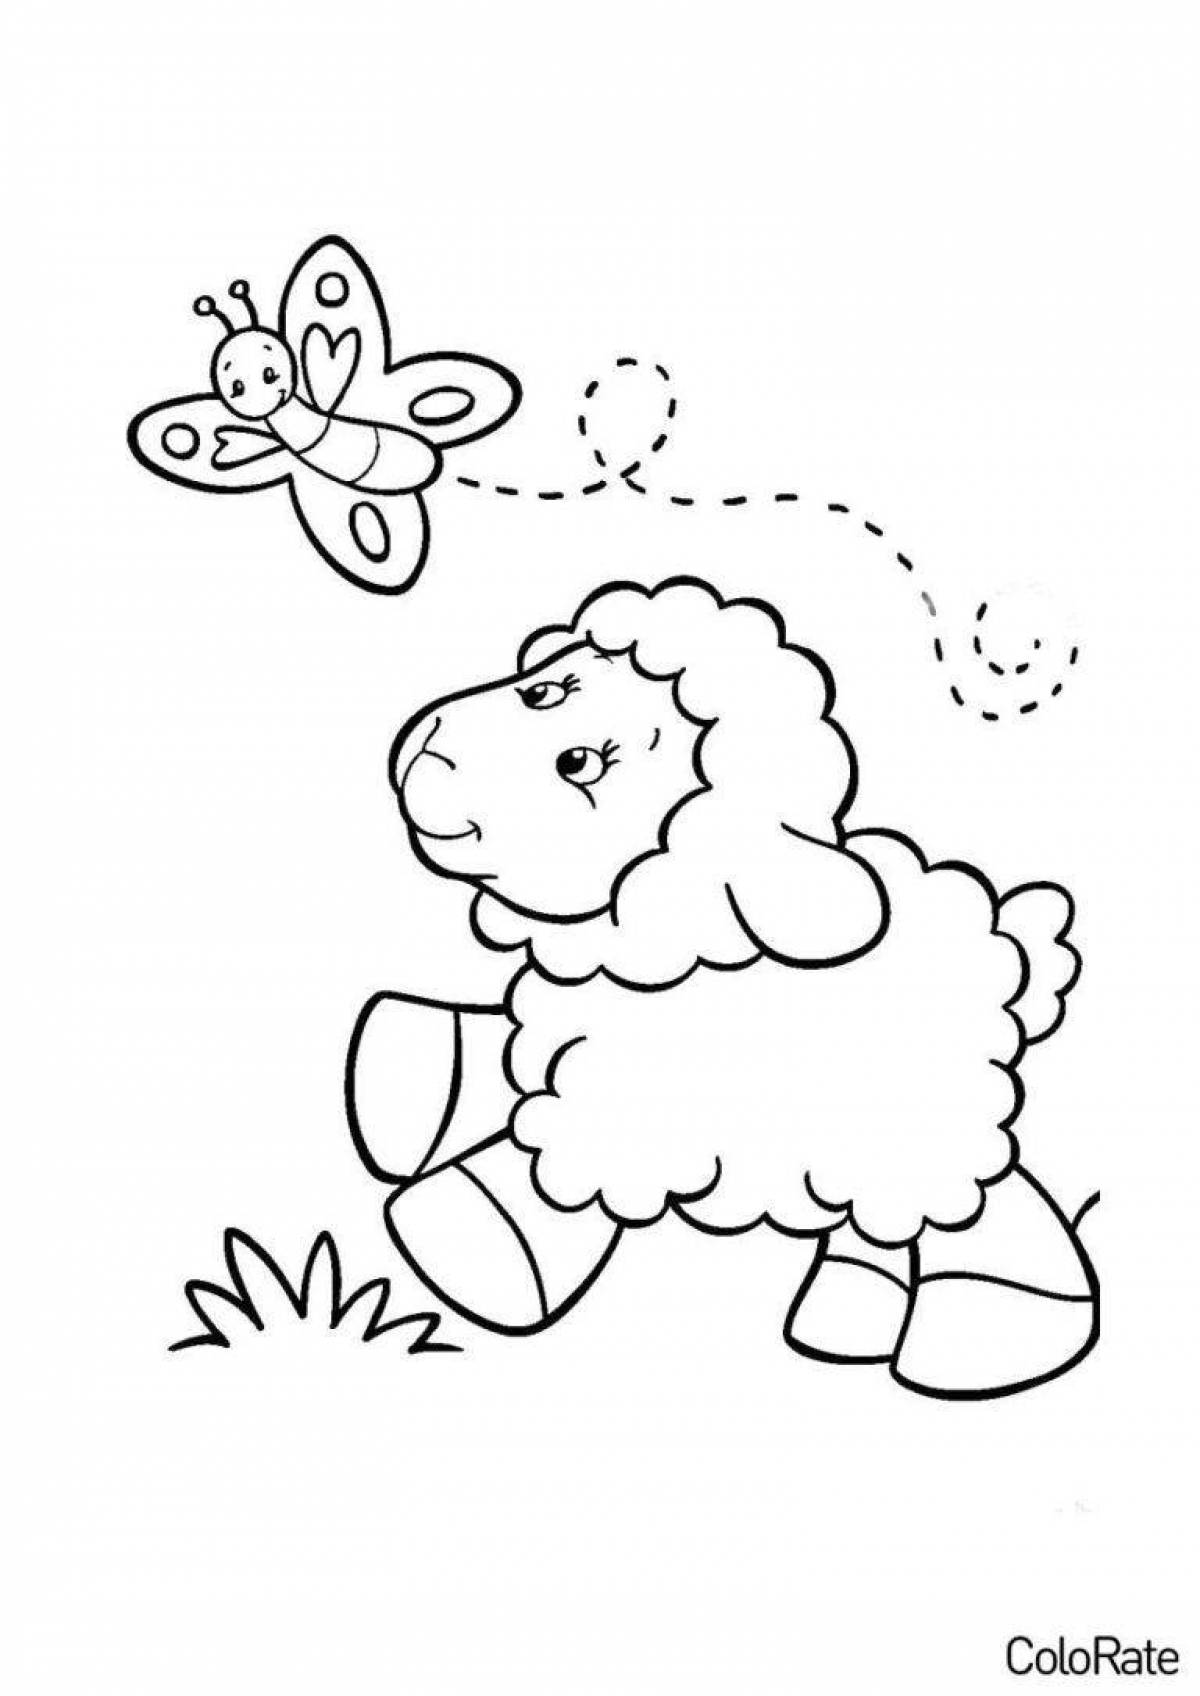 Blissful lamb coloring book for children 3-4 years old